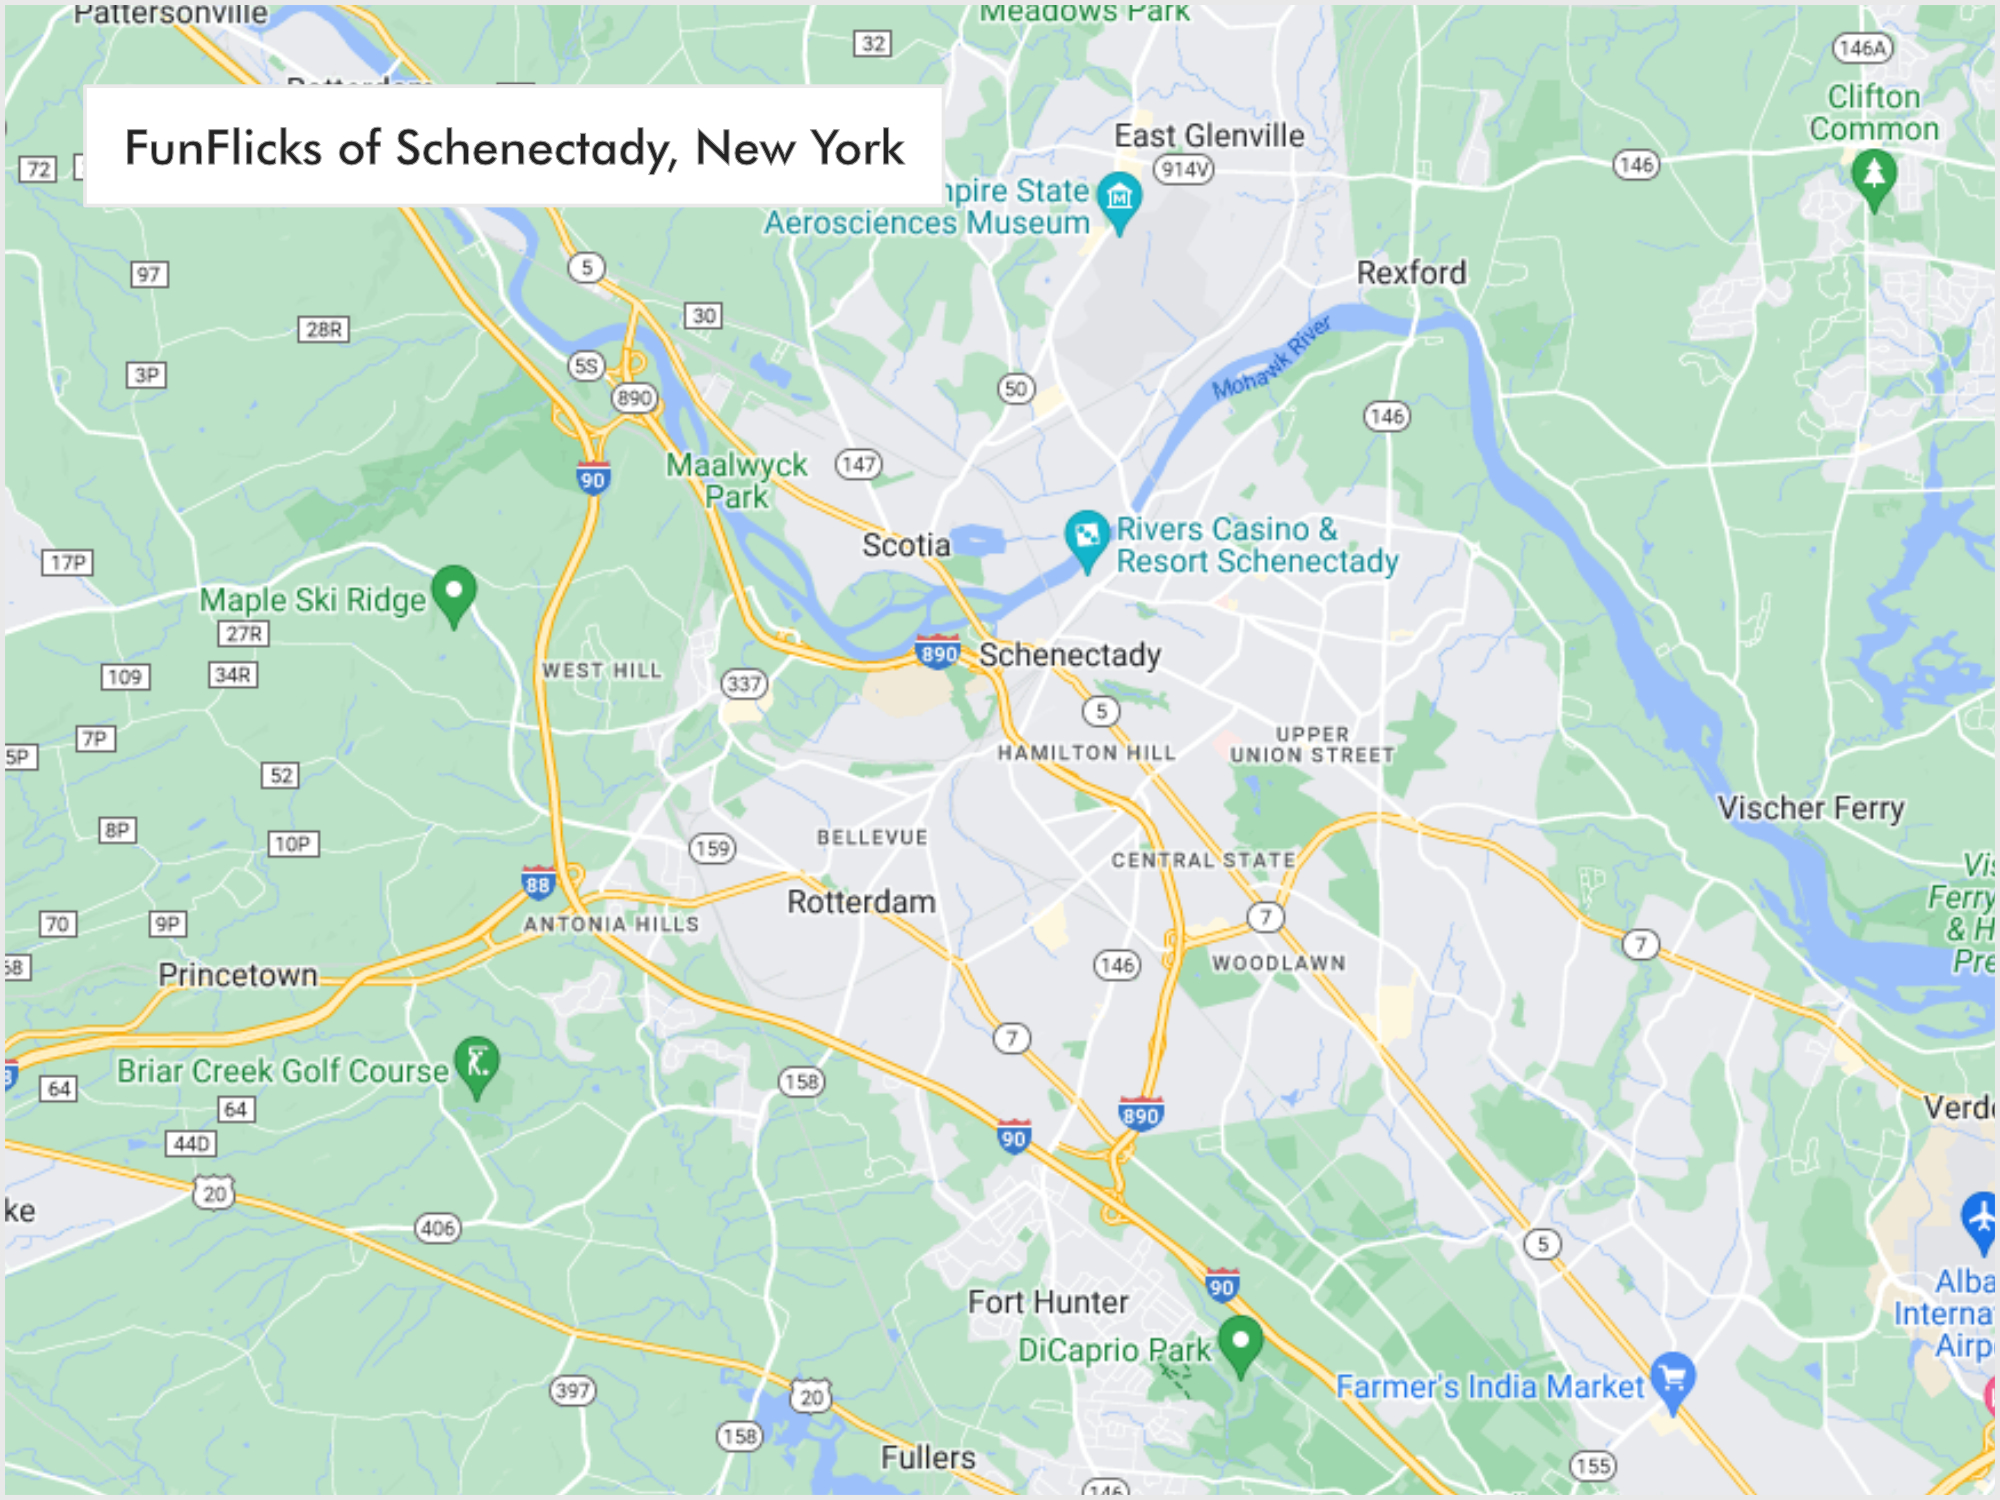 FunFlicks® Schenectady territory map